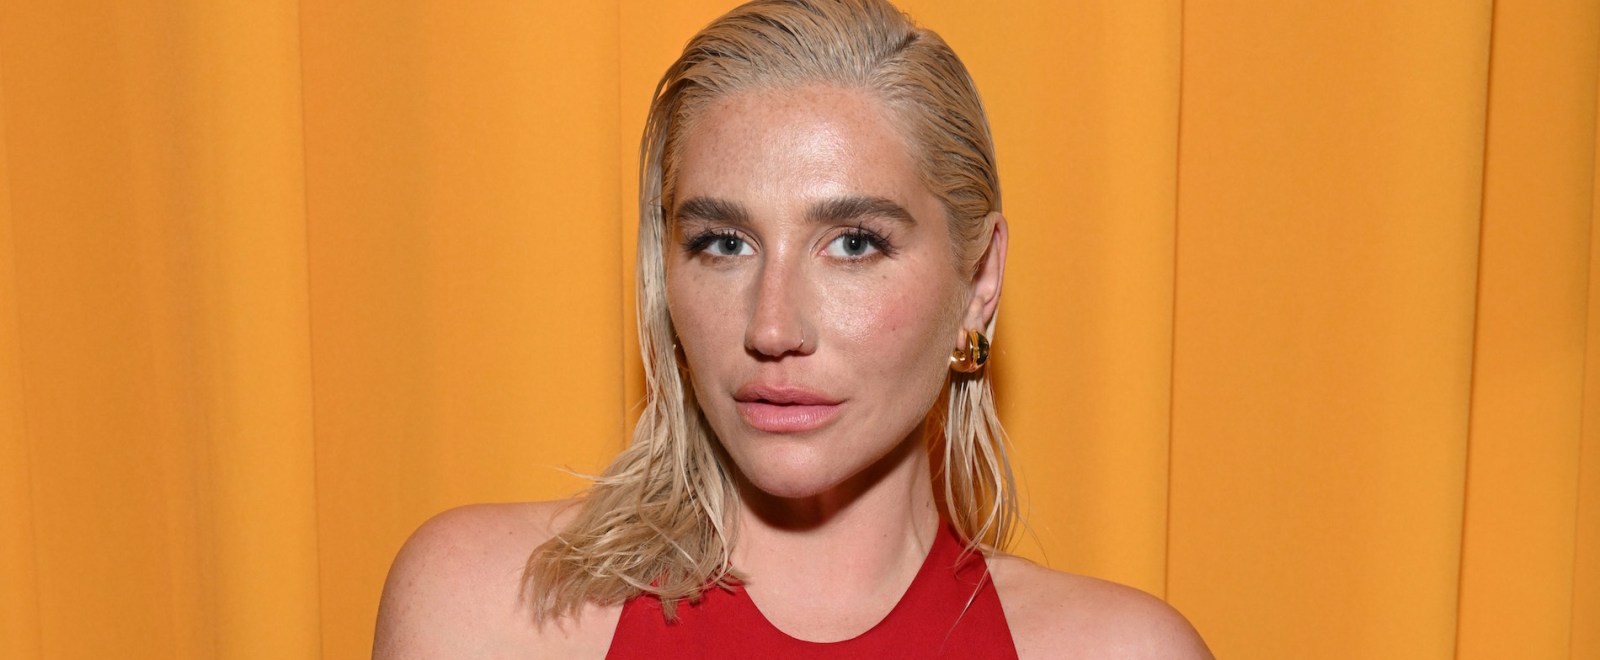 Kesha Elton John AIDS Foundation's 31st Annual Academy Awards Viewing Party 2023